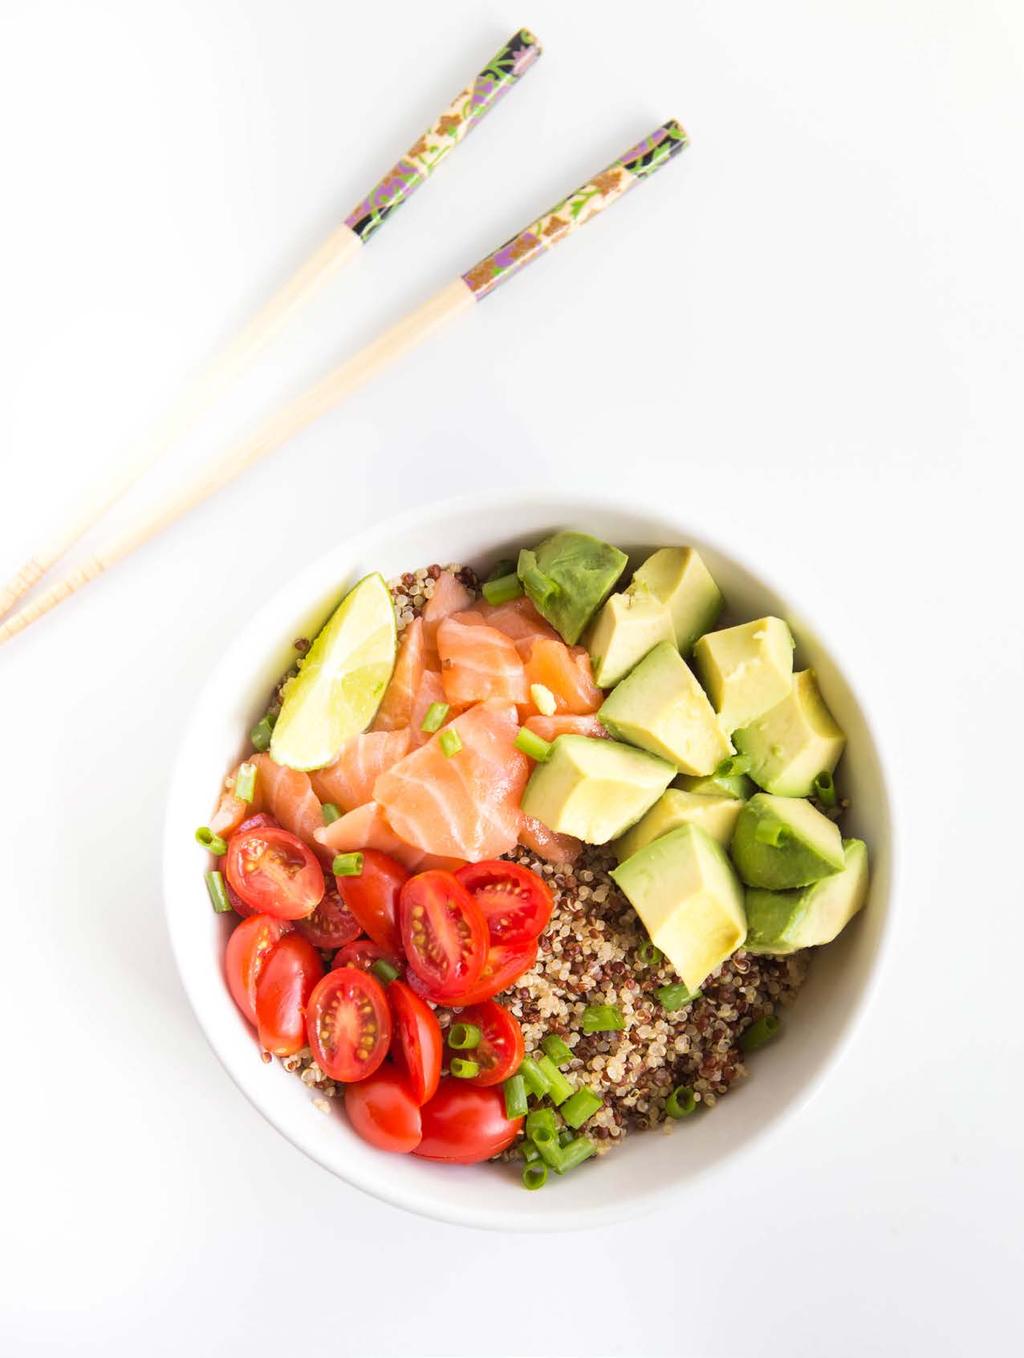 18. 5-Min Quinoa Sushi Bowl With a little bit of advance preparation, you can make this tasty sushi bowl in 5 minutes flat. It's faster and less expensive than takeout, but just as tasty!